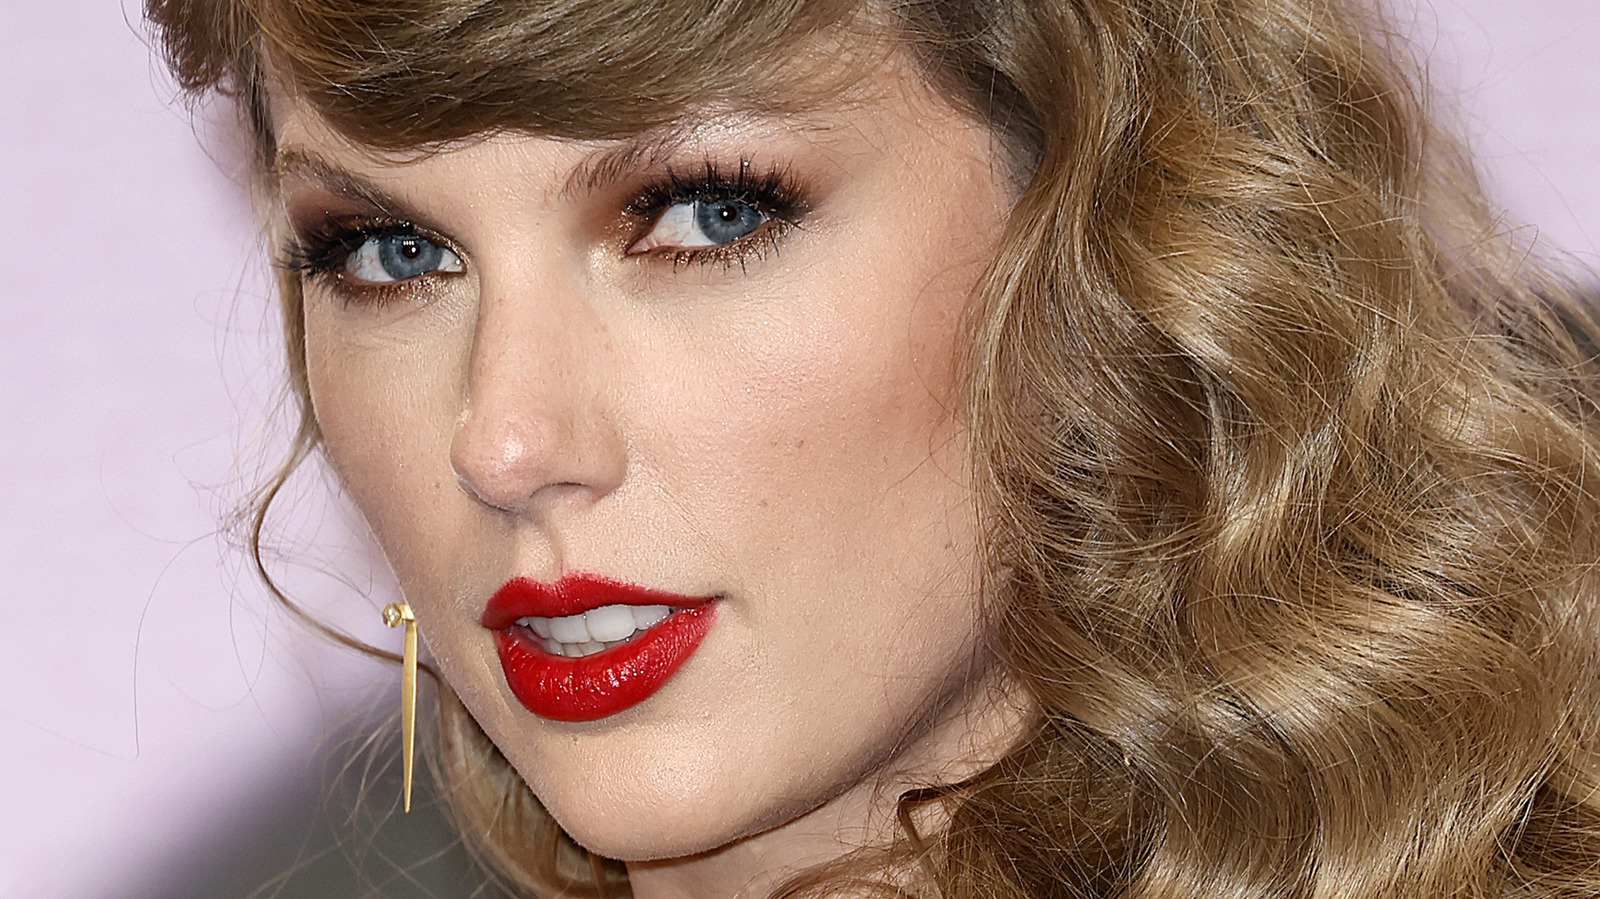 Why Fans Are so Obsessed With Taylor Swift's Love Life: Experts